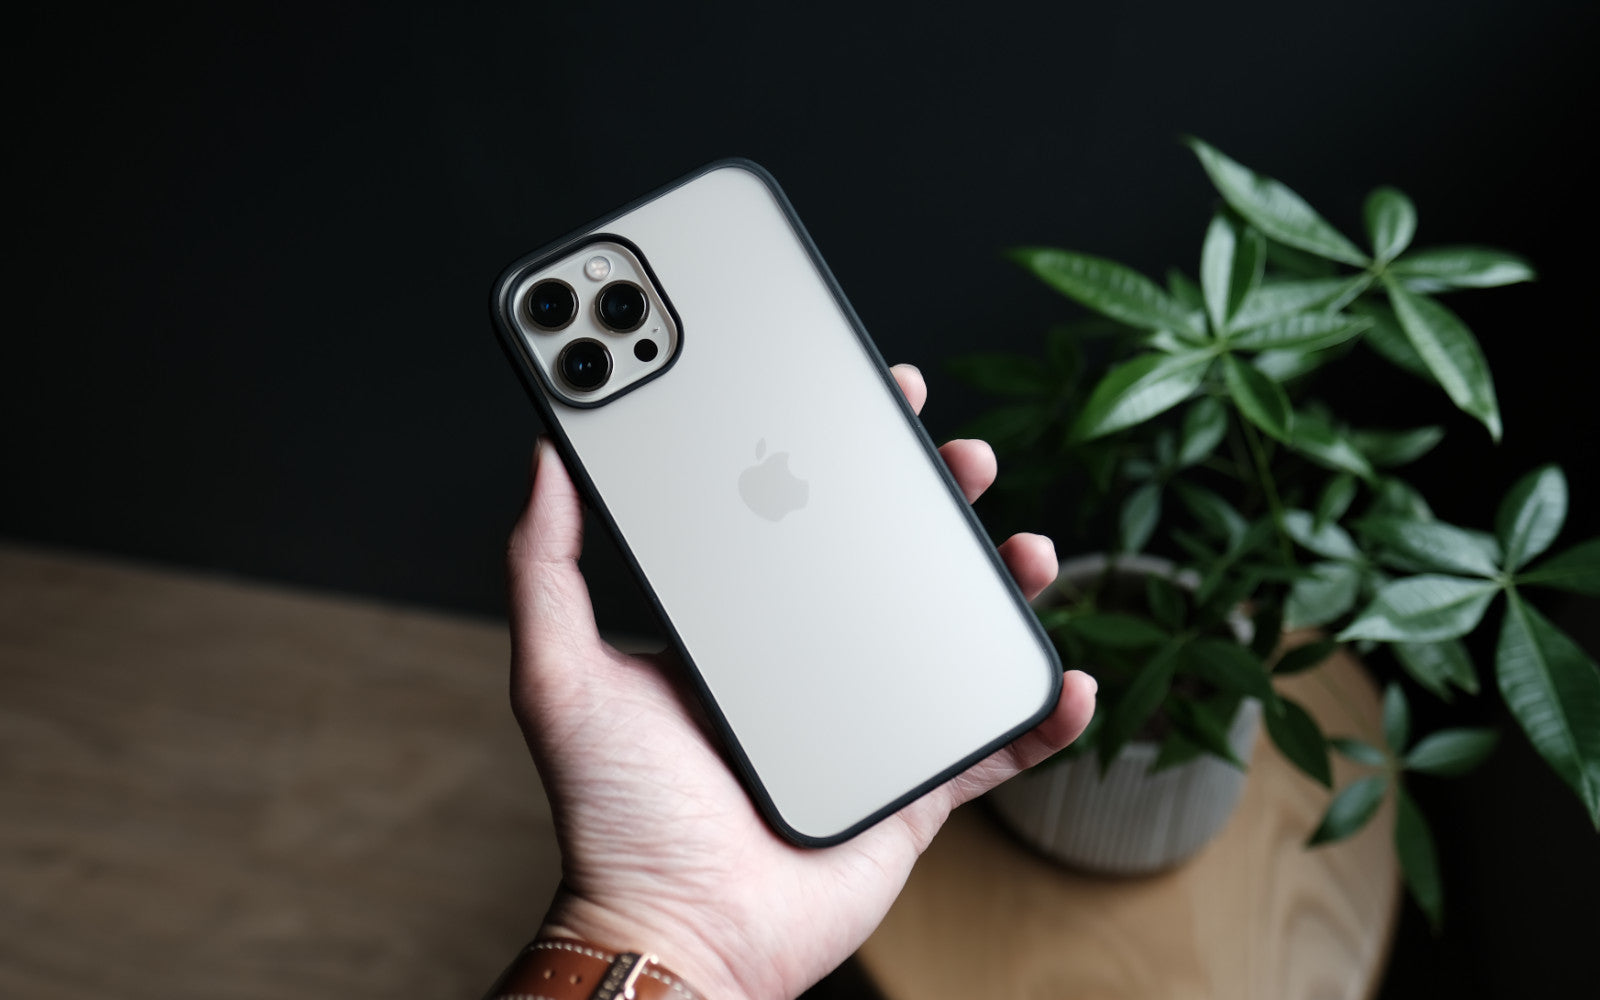 Bare Armour - Minimalist Shock Resistant Case for iPhone 12 Pro and iPhone 12 Pro Max - Branding-Free